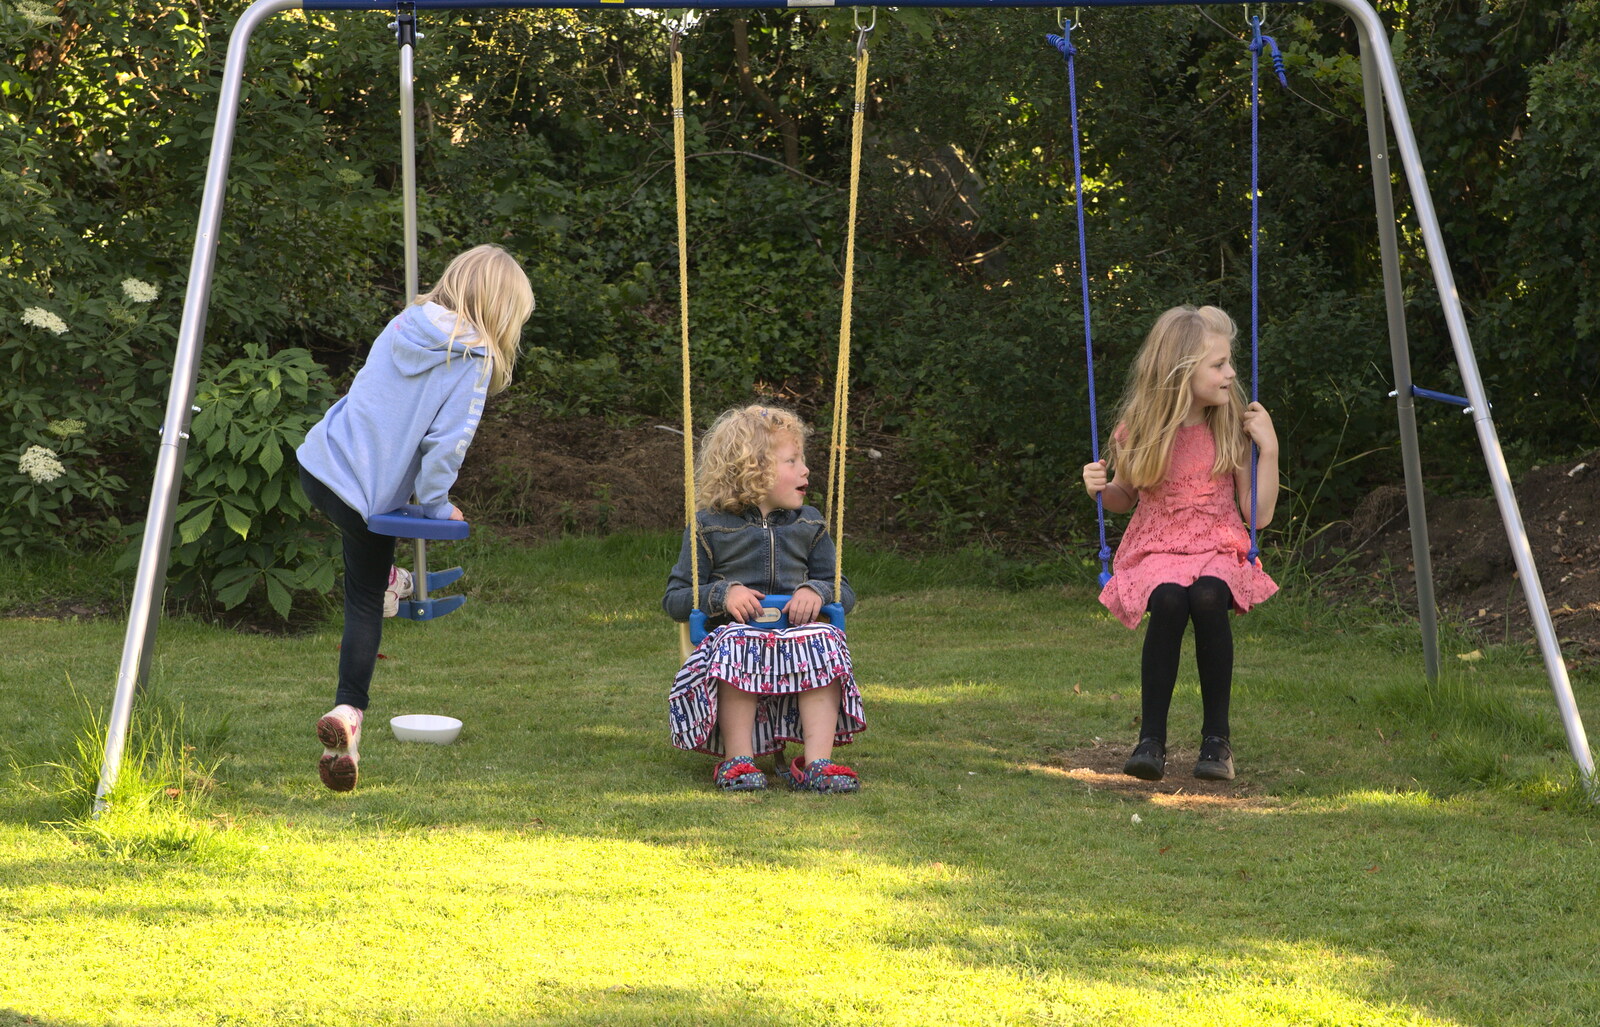 Rosie and Jessica on the swing from A "Not a Birthday Party" Barbeque, Brome, Suffolk - 25th May 2014